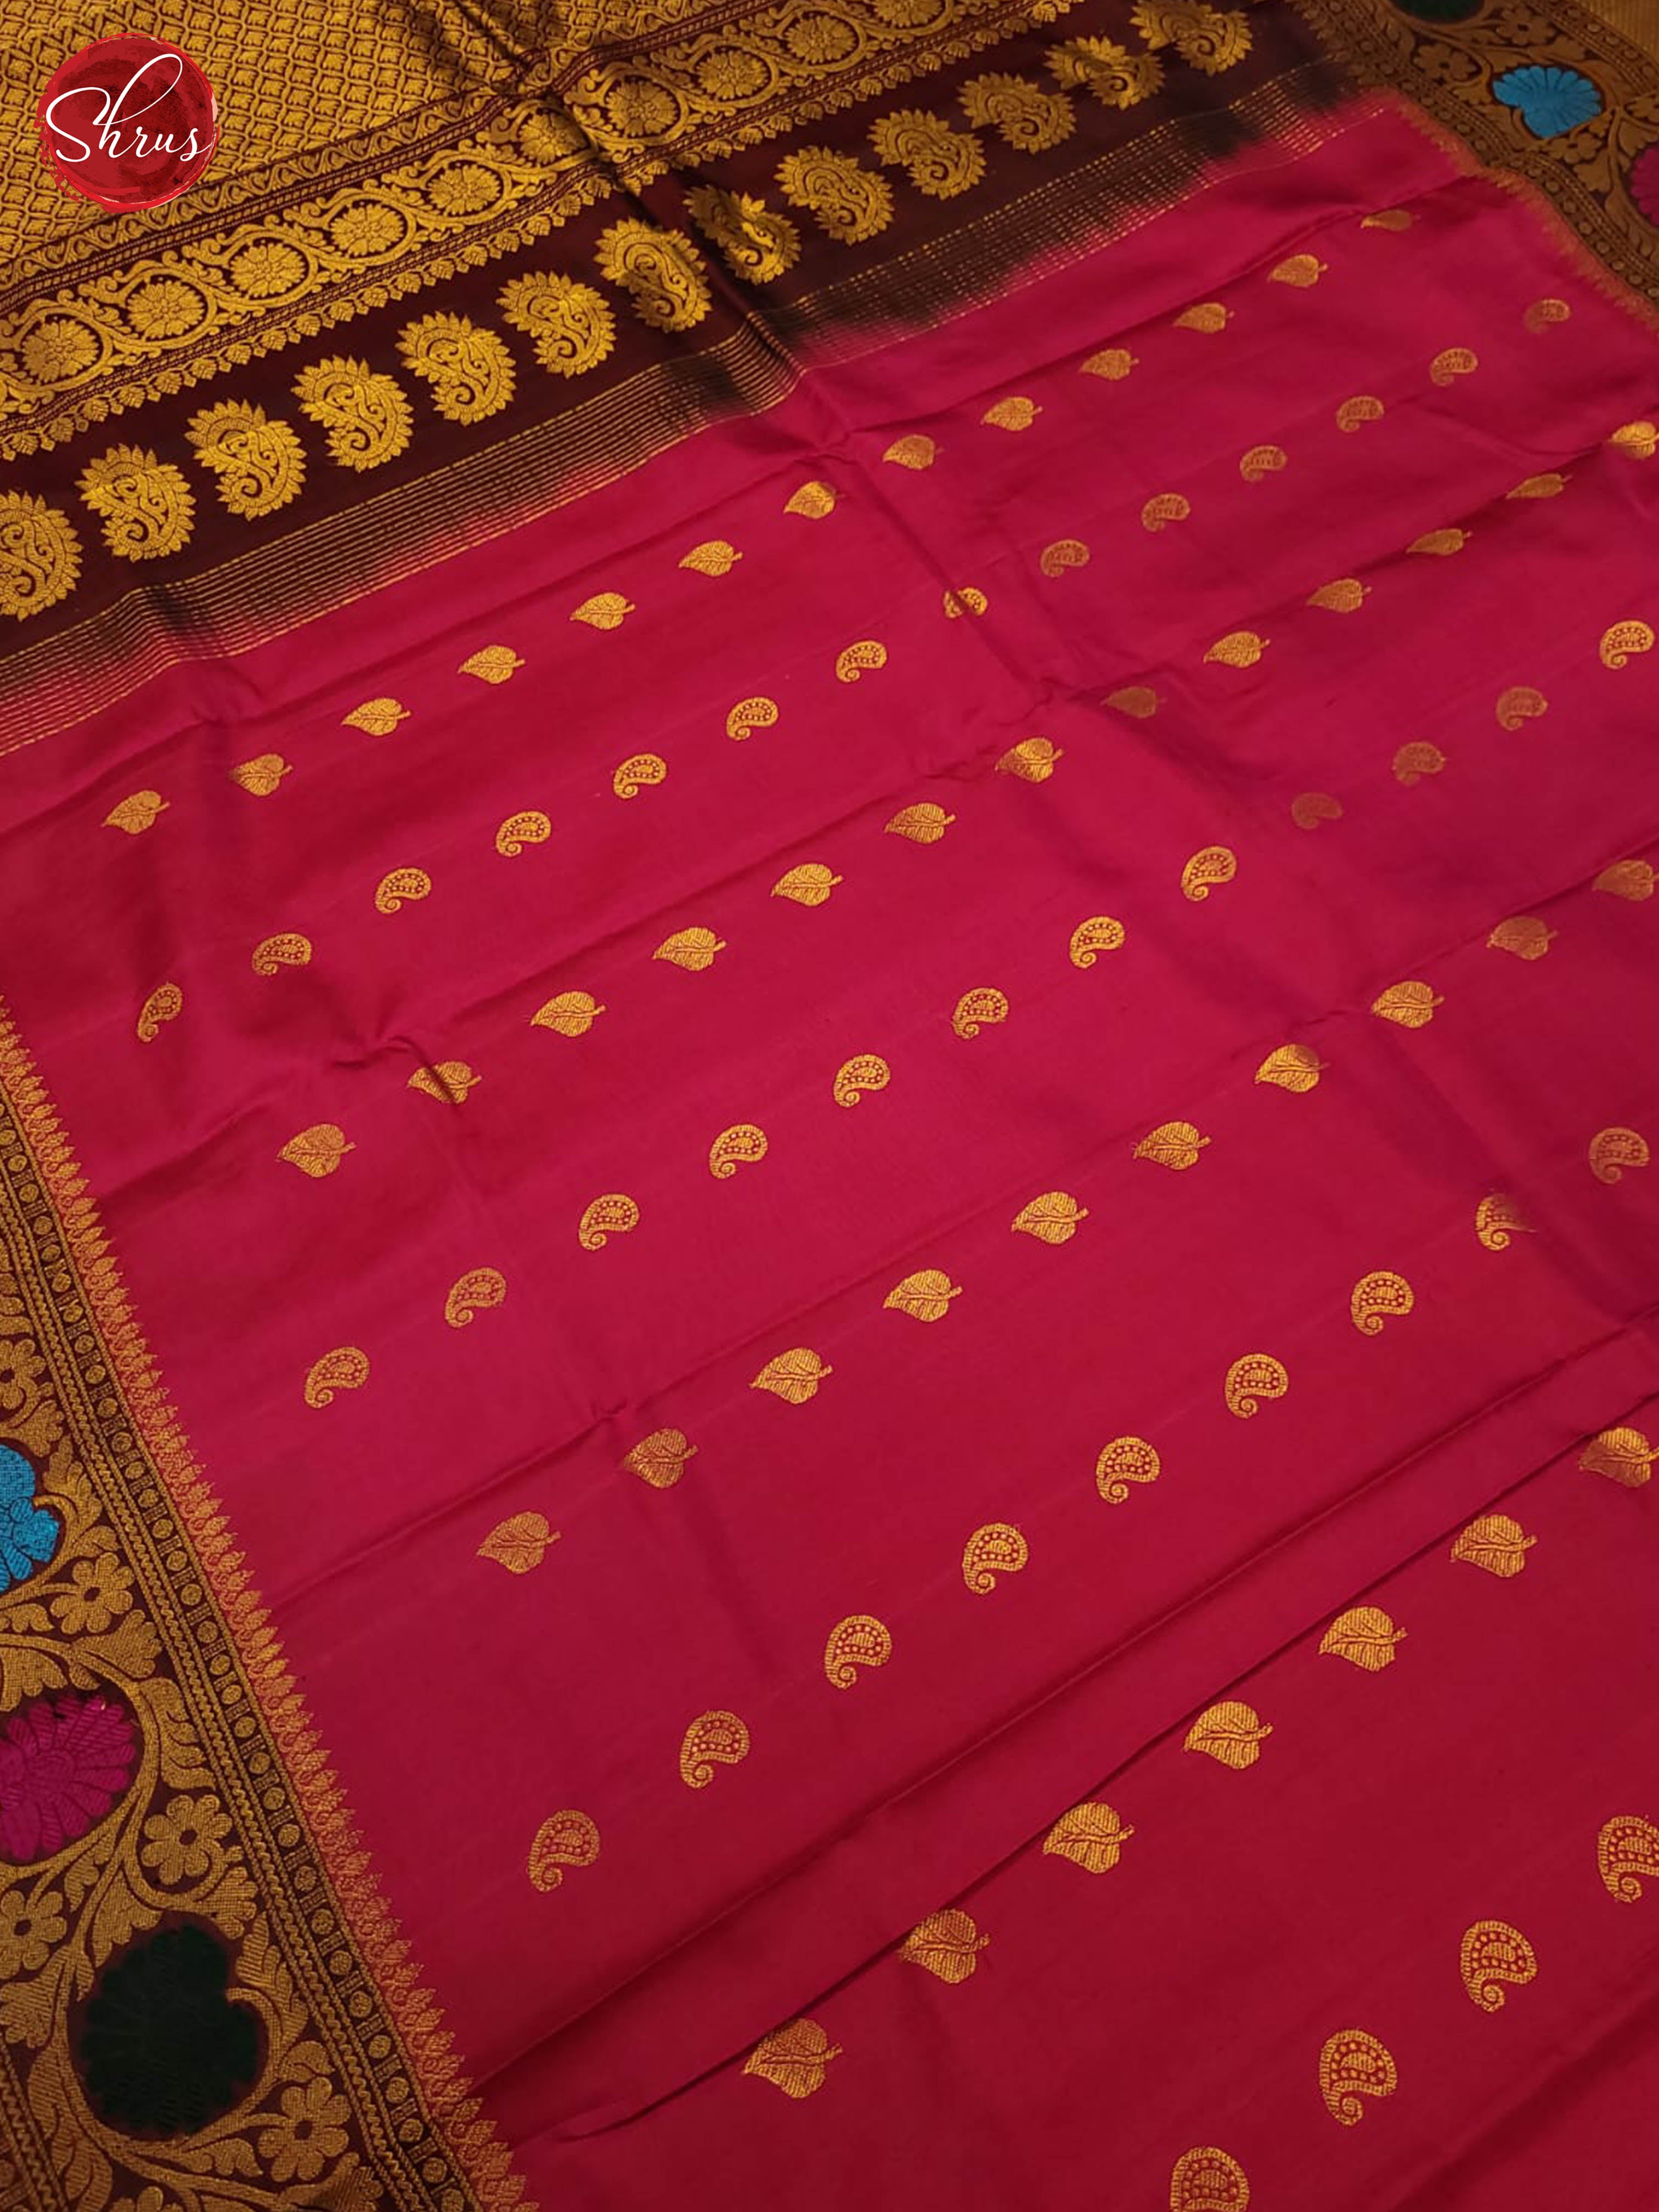 Pink and Brown-Gadwal Silk - Shop on ShrusEternity.com